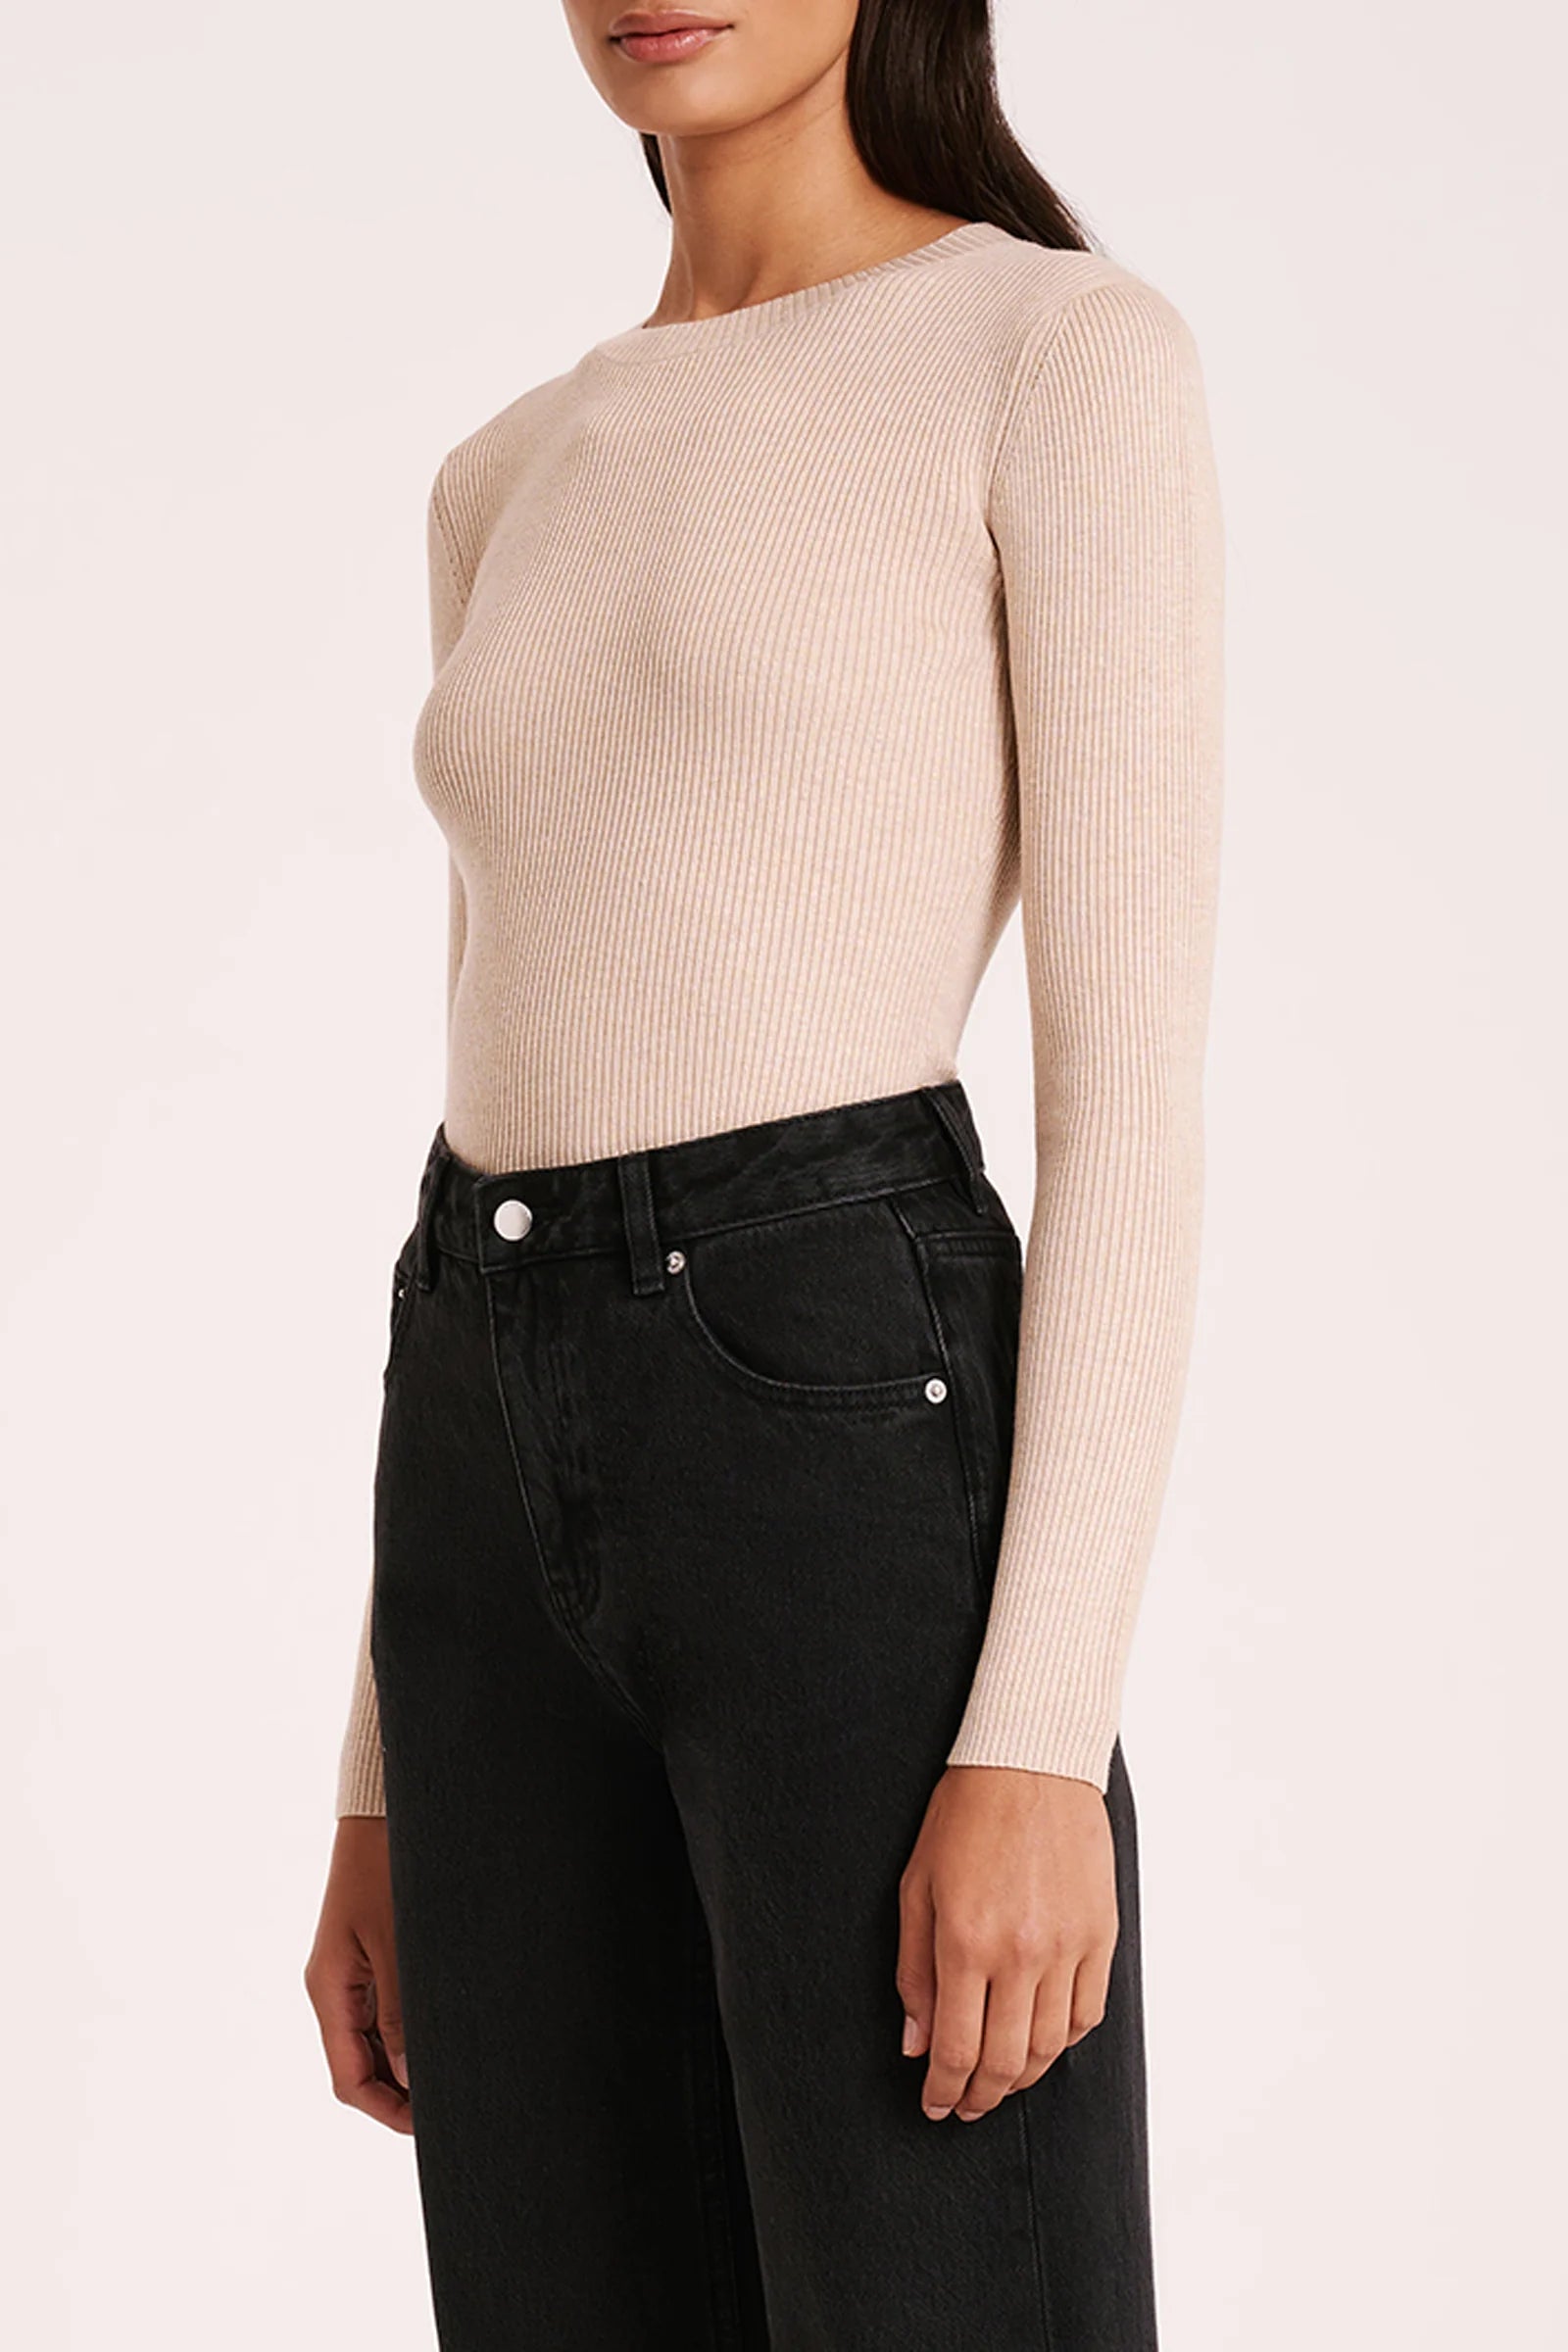 Nude Lucy | Classic LS Knit - Oatmeal